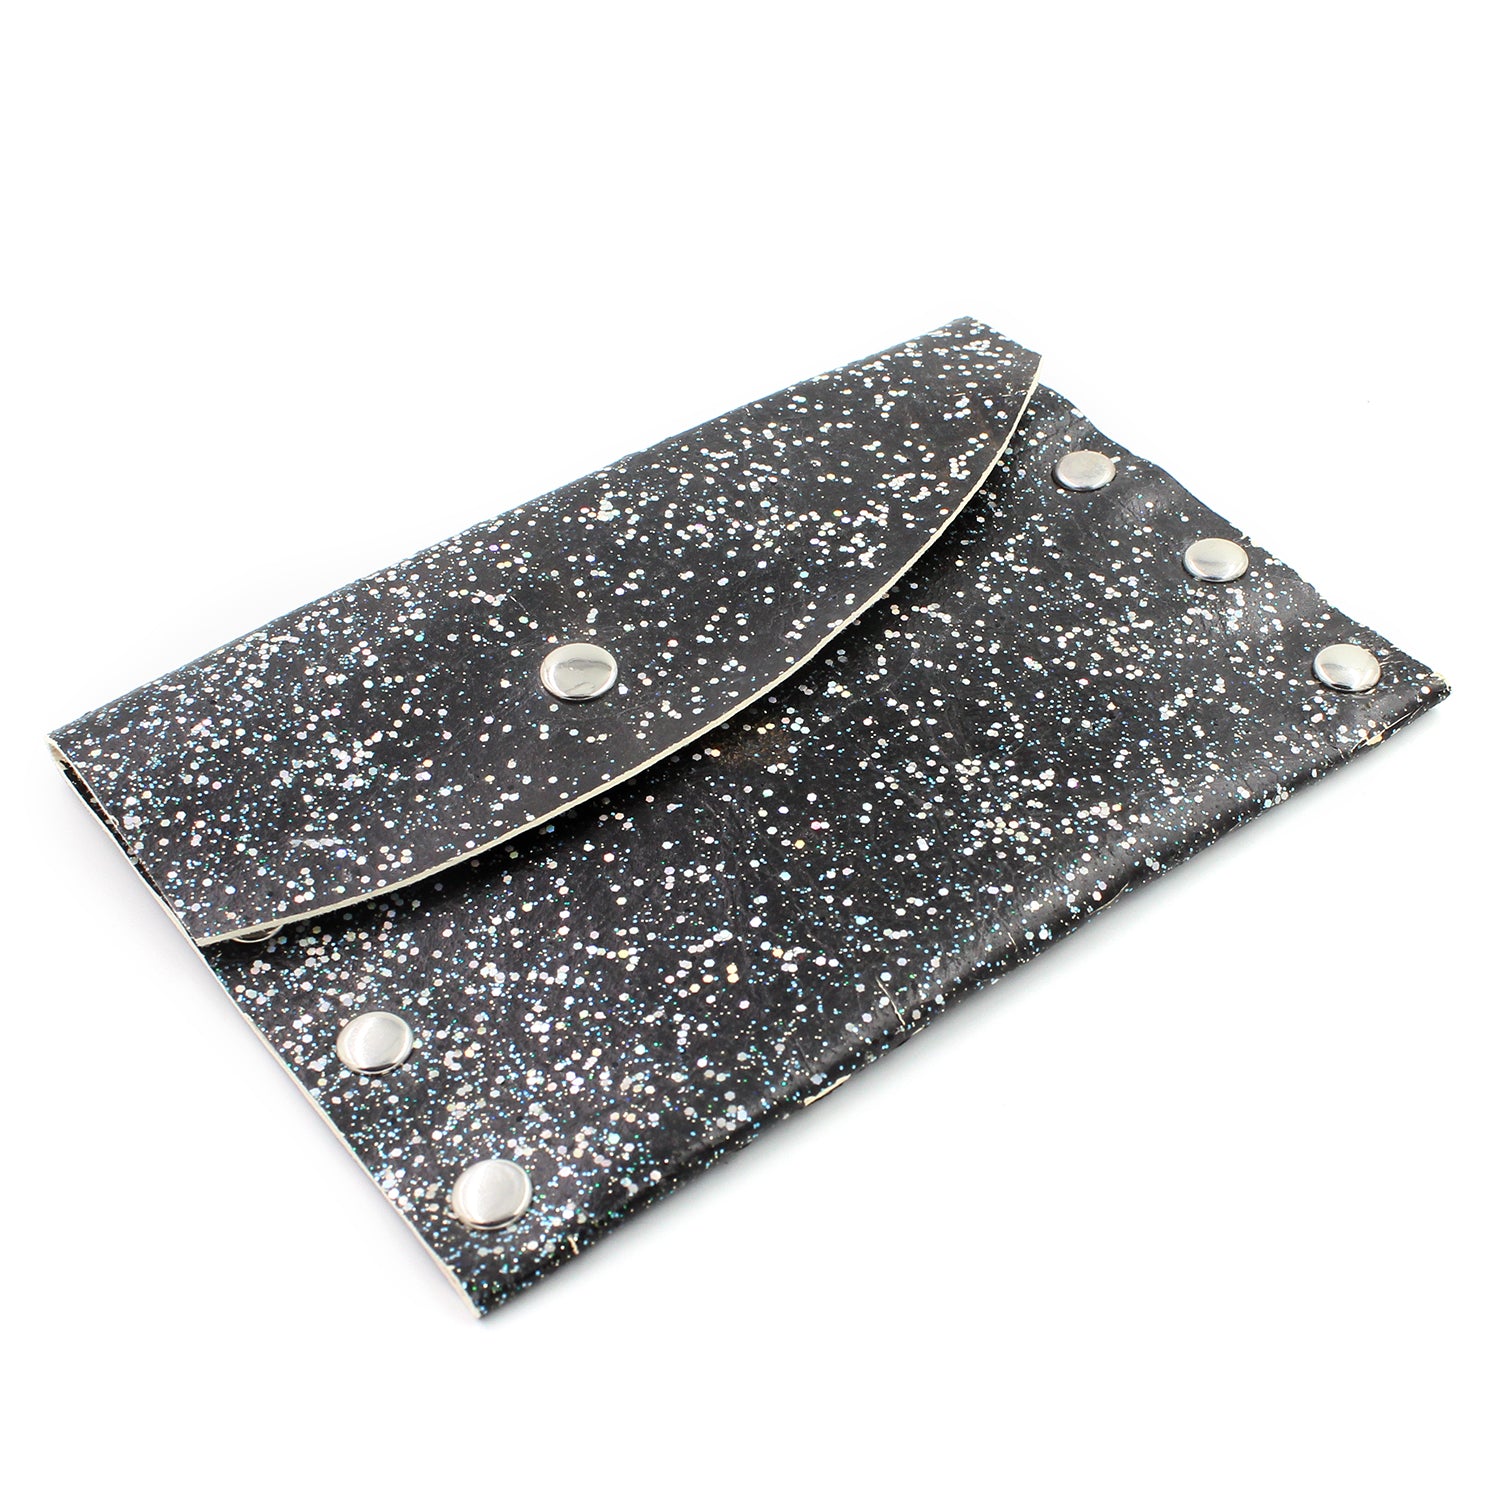 Hand Decorated Black Glitter Leather Card Case / Mini Wallet